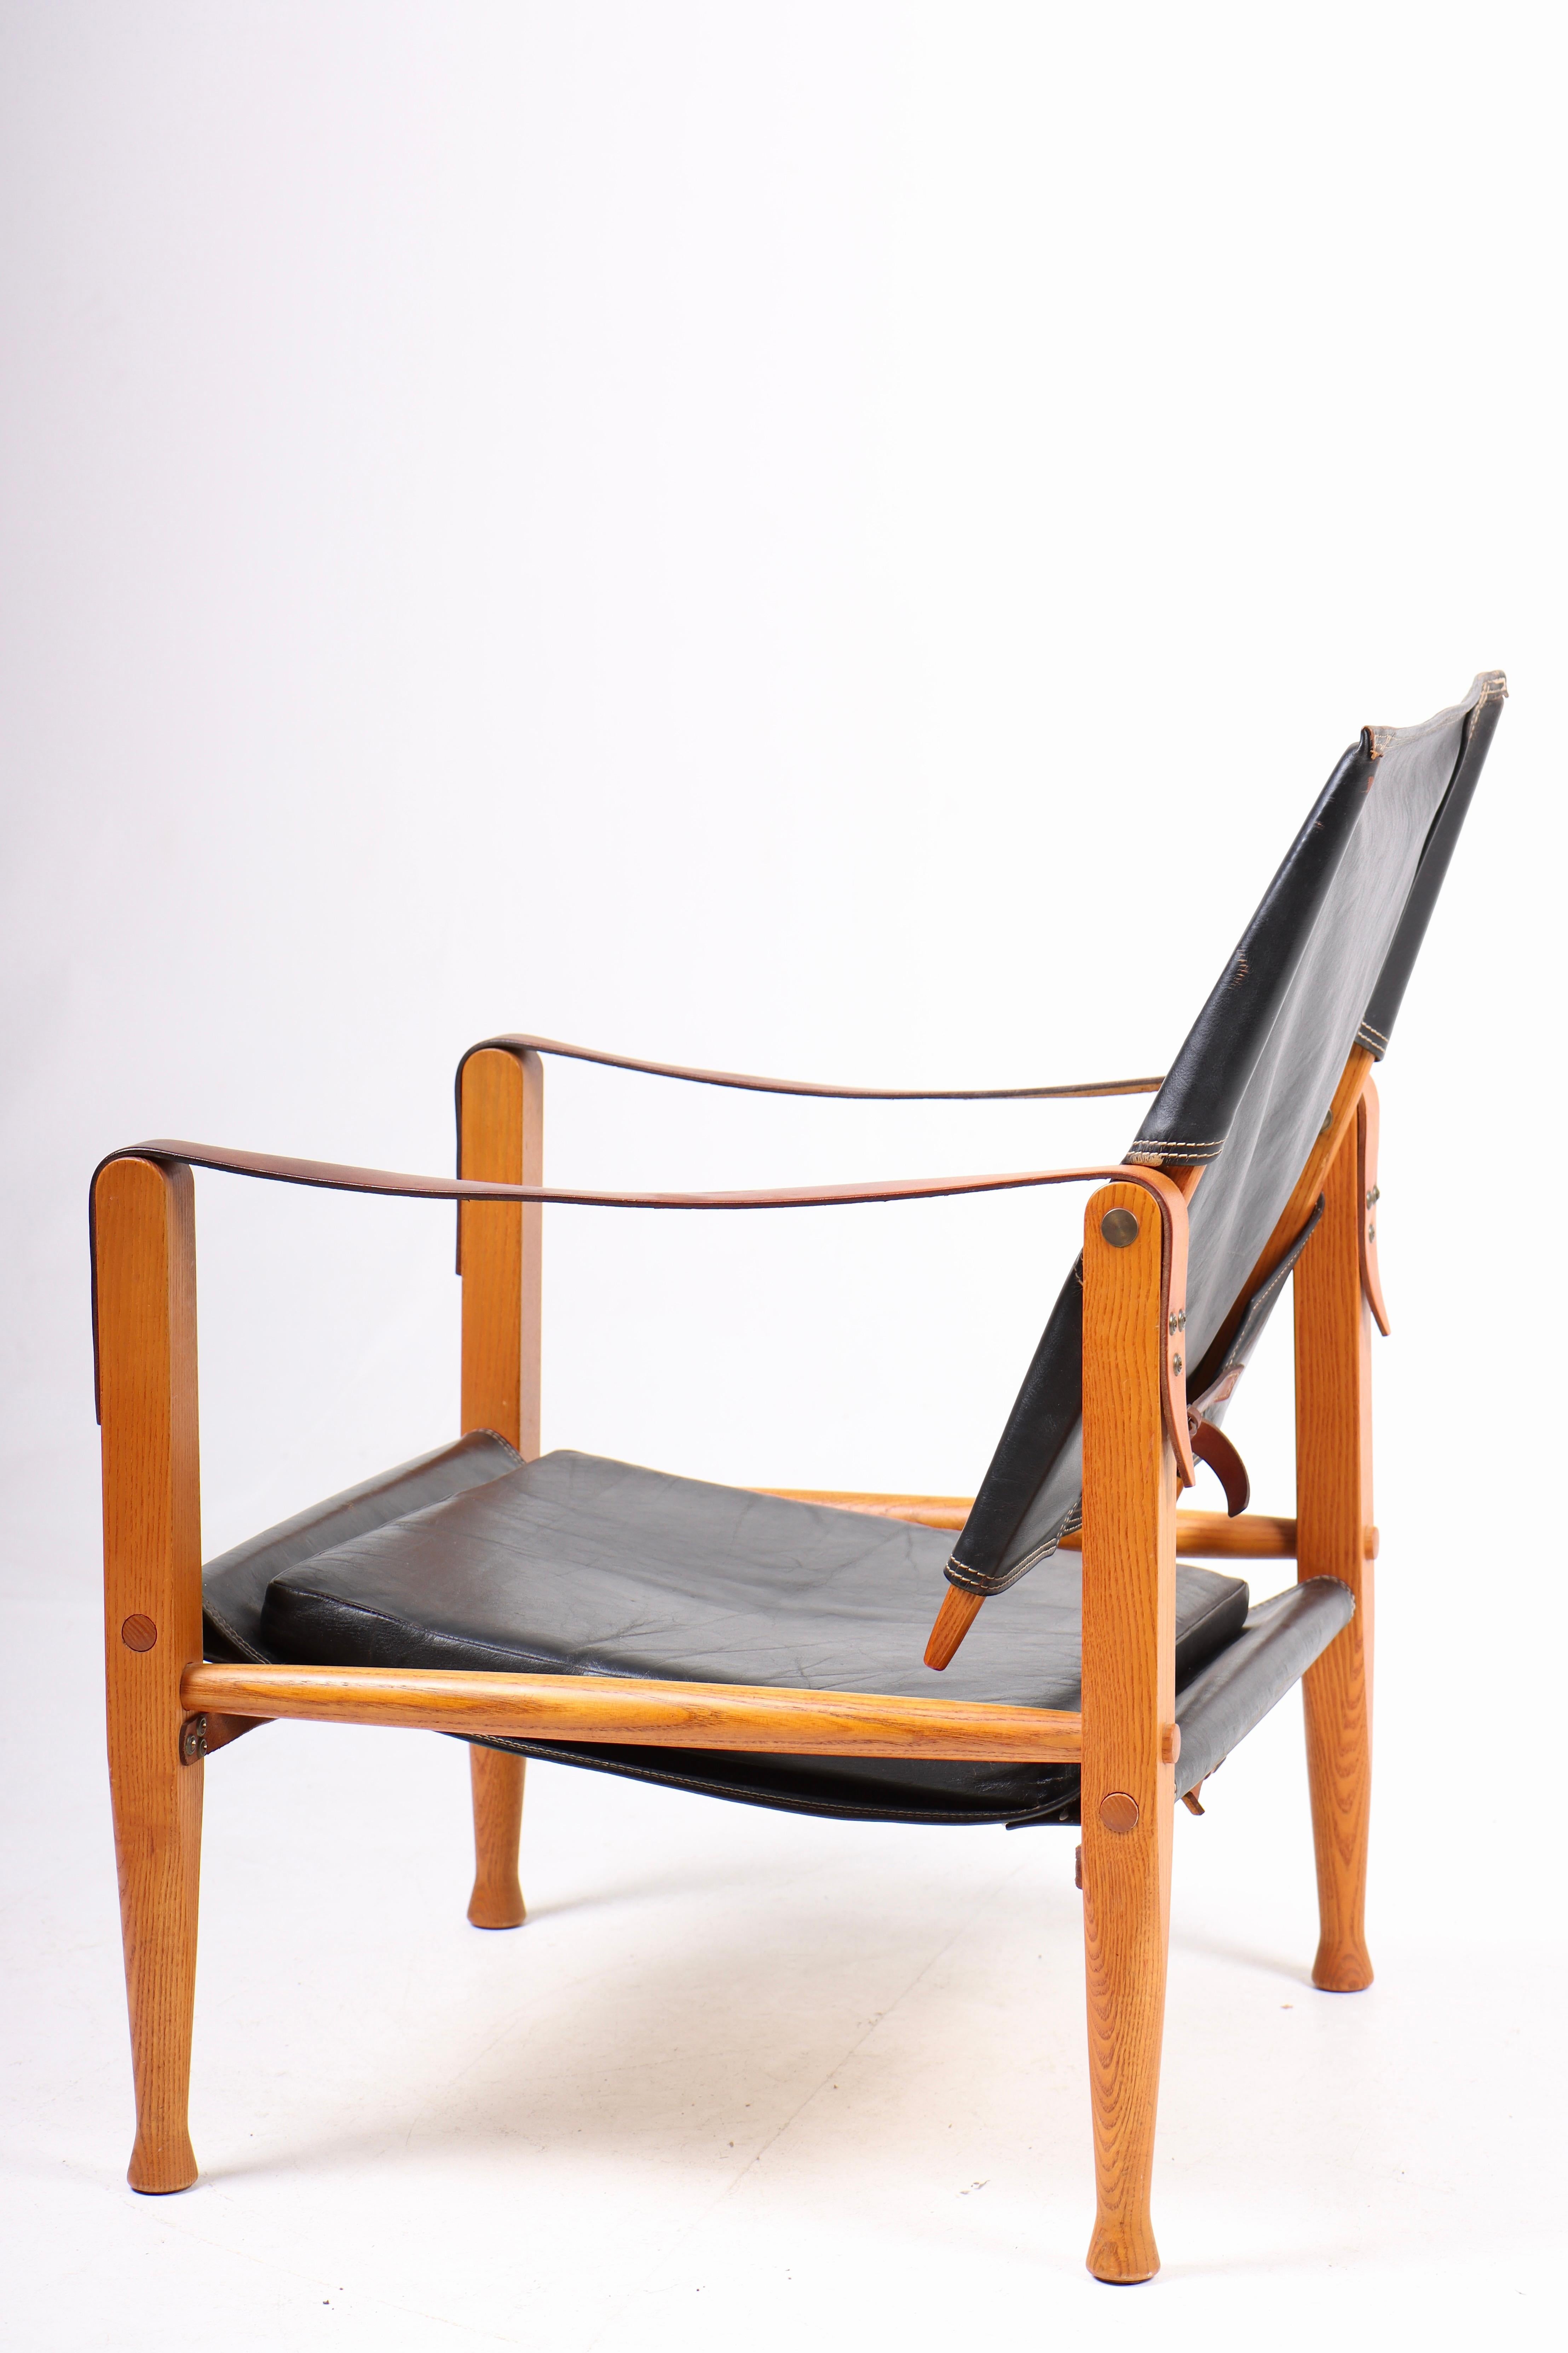 Safari chair in leather. Designed by Maa. Kaare Klint for Rud Rasmussen cabinetmakers of Denmark in 1933. Great original condition.